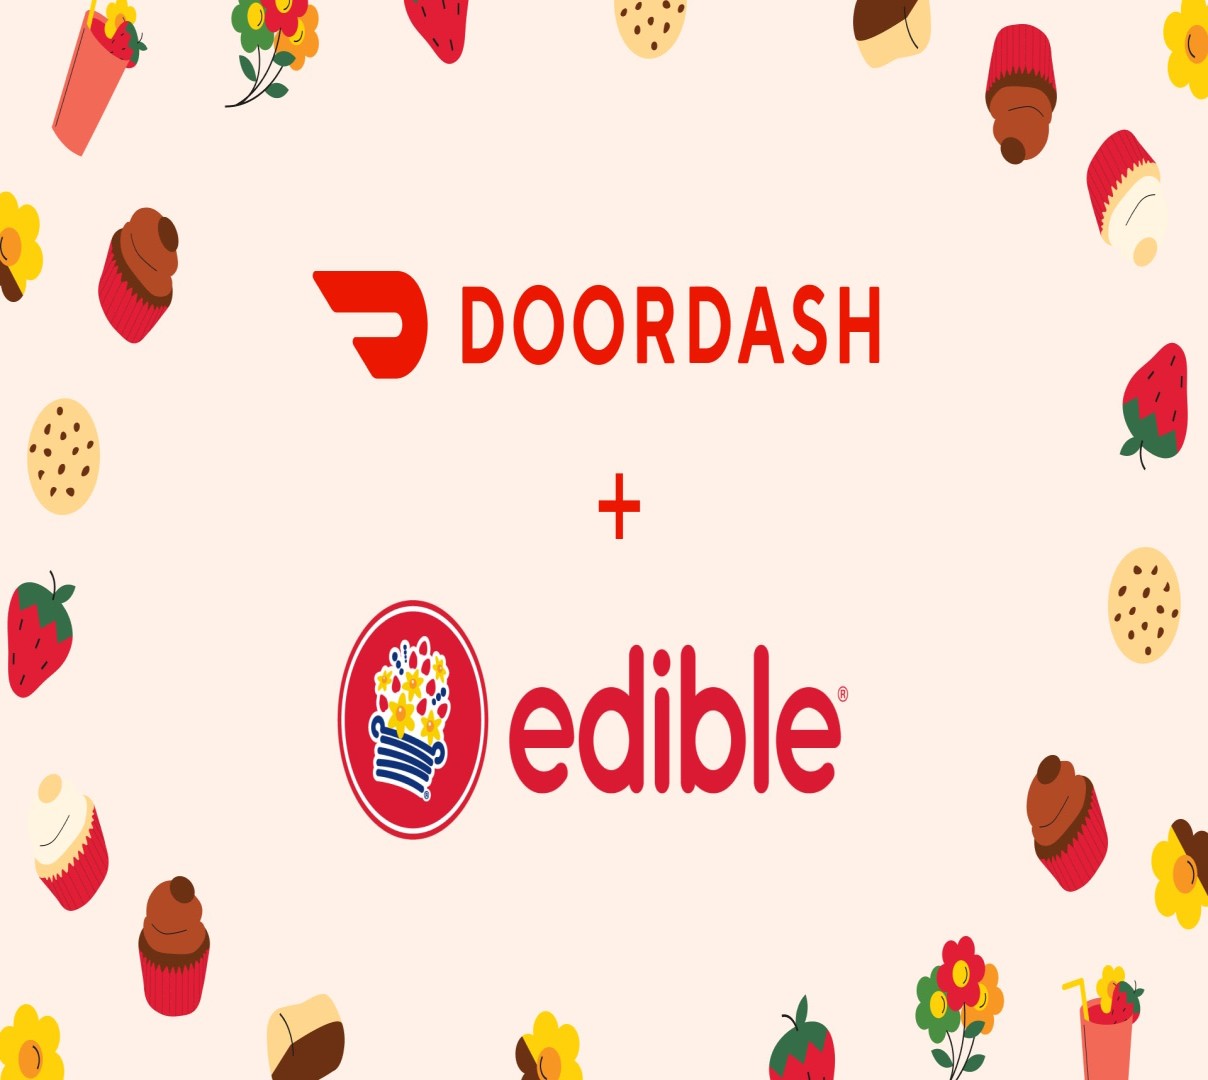 DoorDash Launches Annual 12 Day Holiday Savings Event